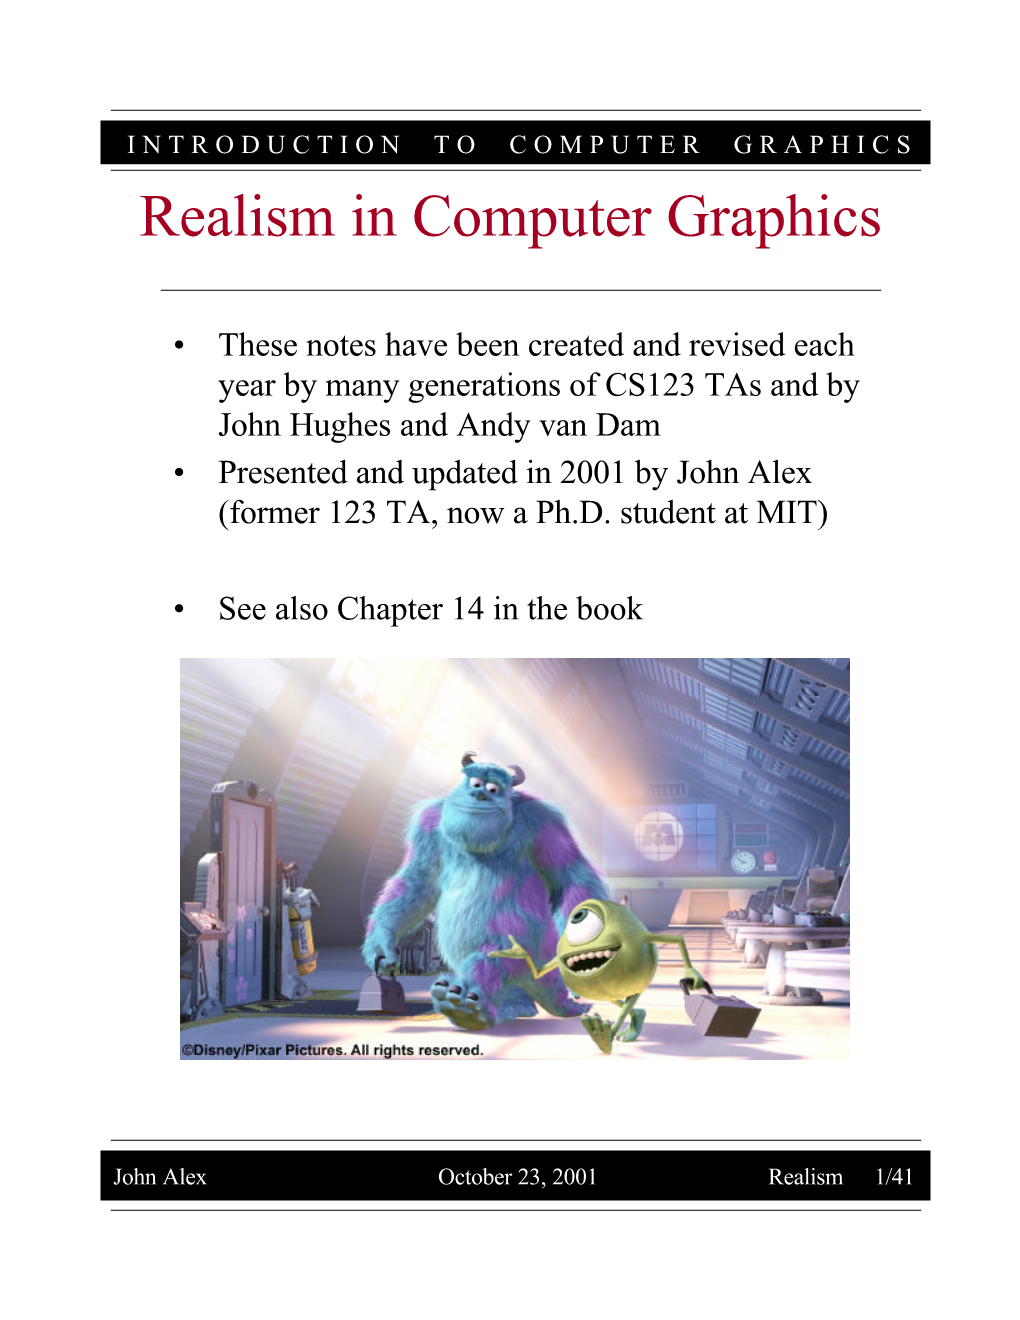 Realism in Computer Graphics